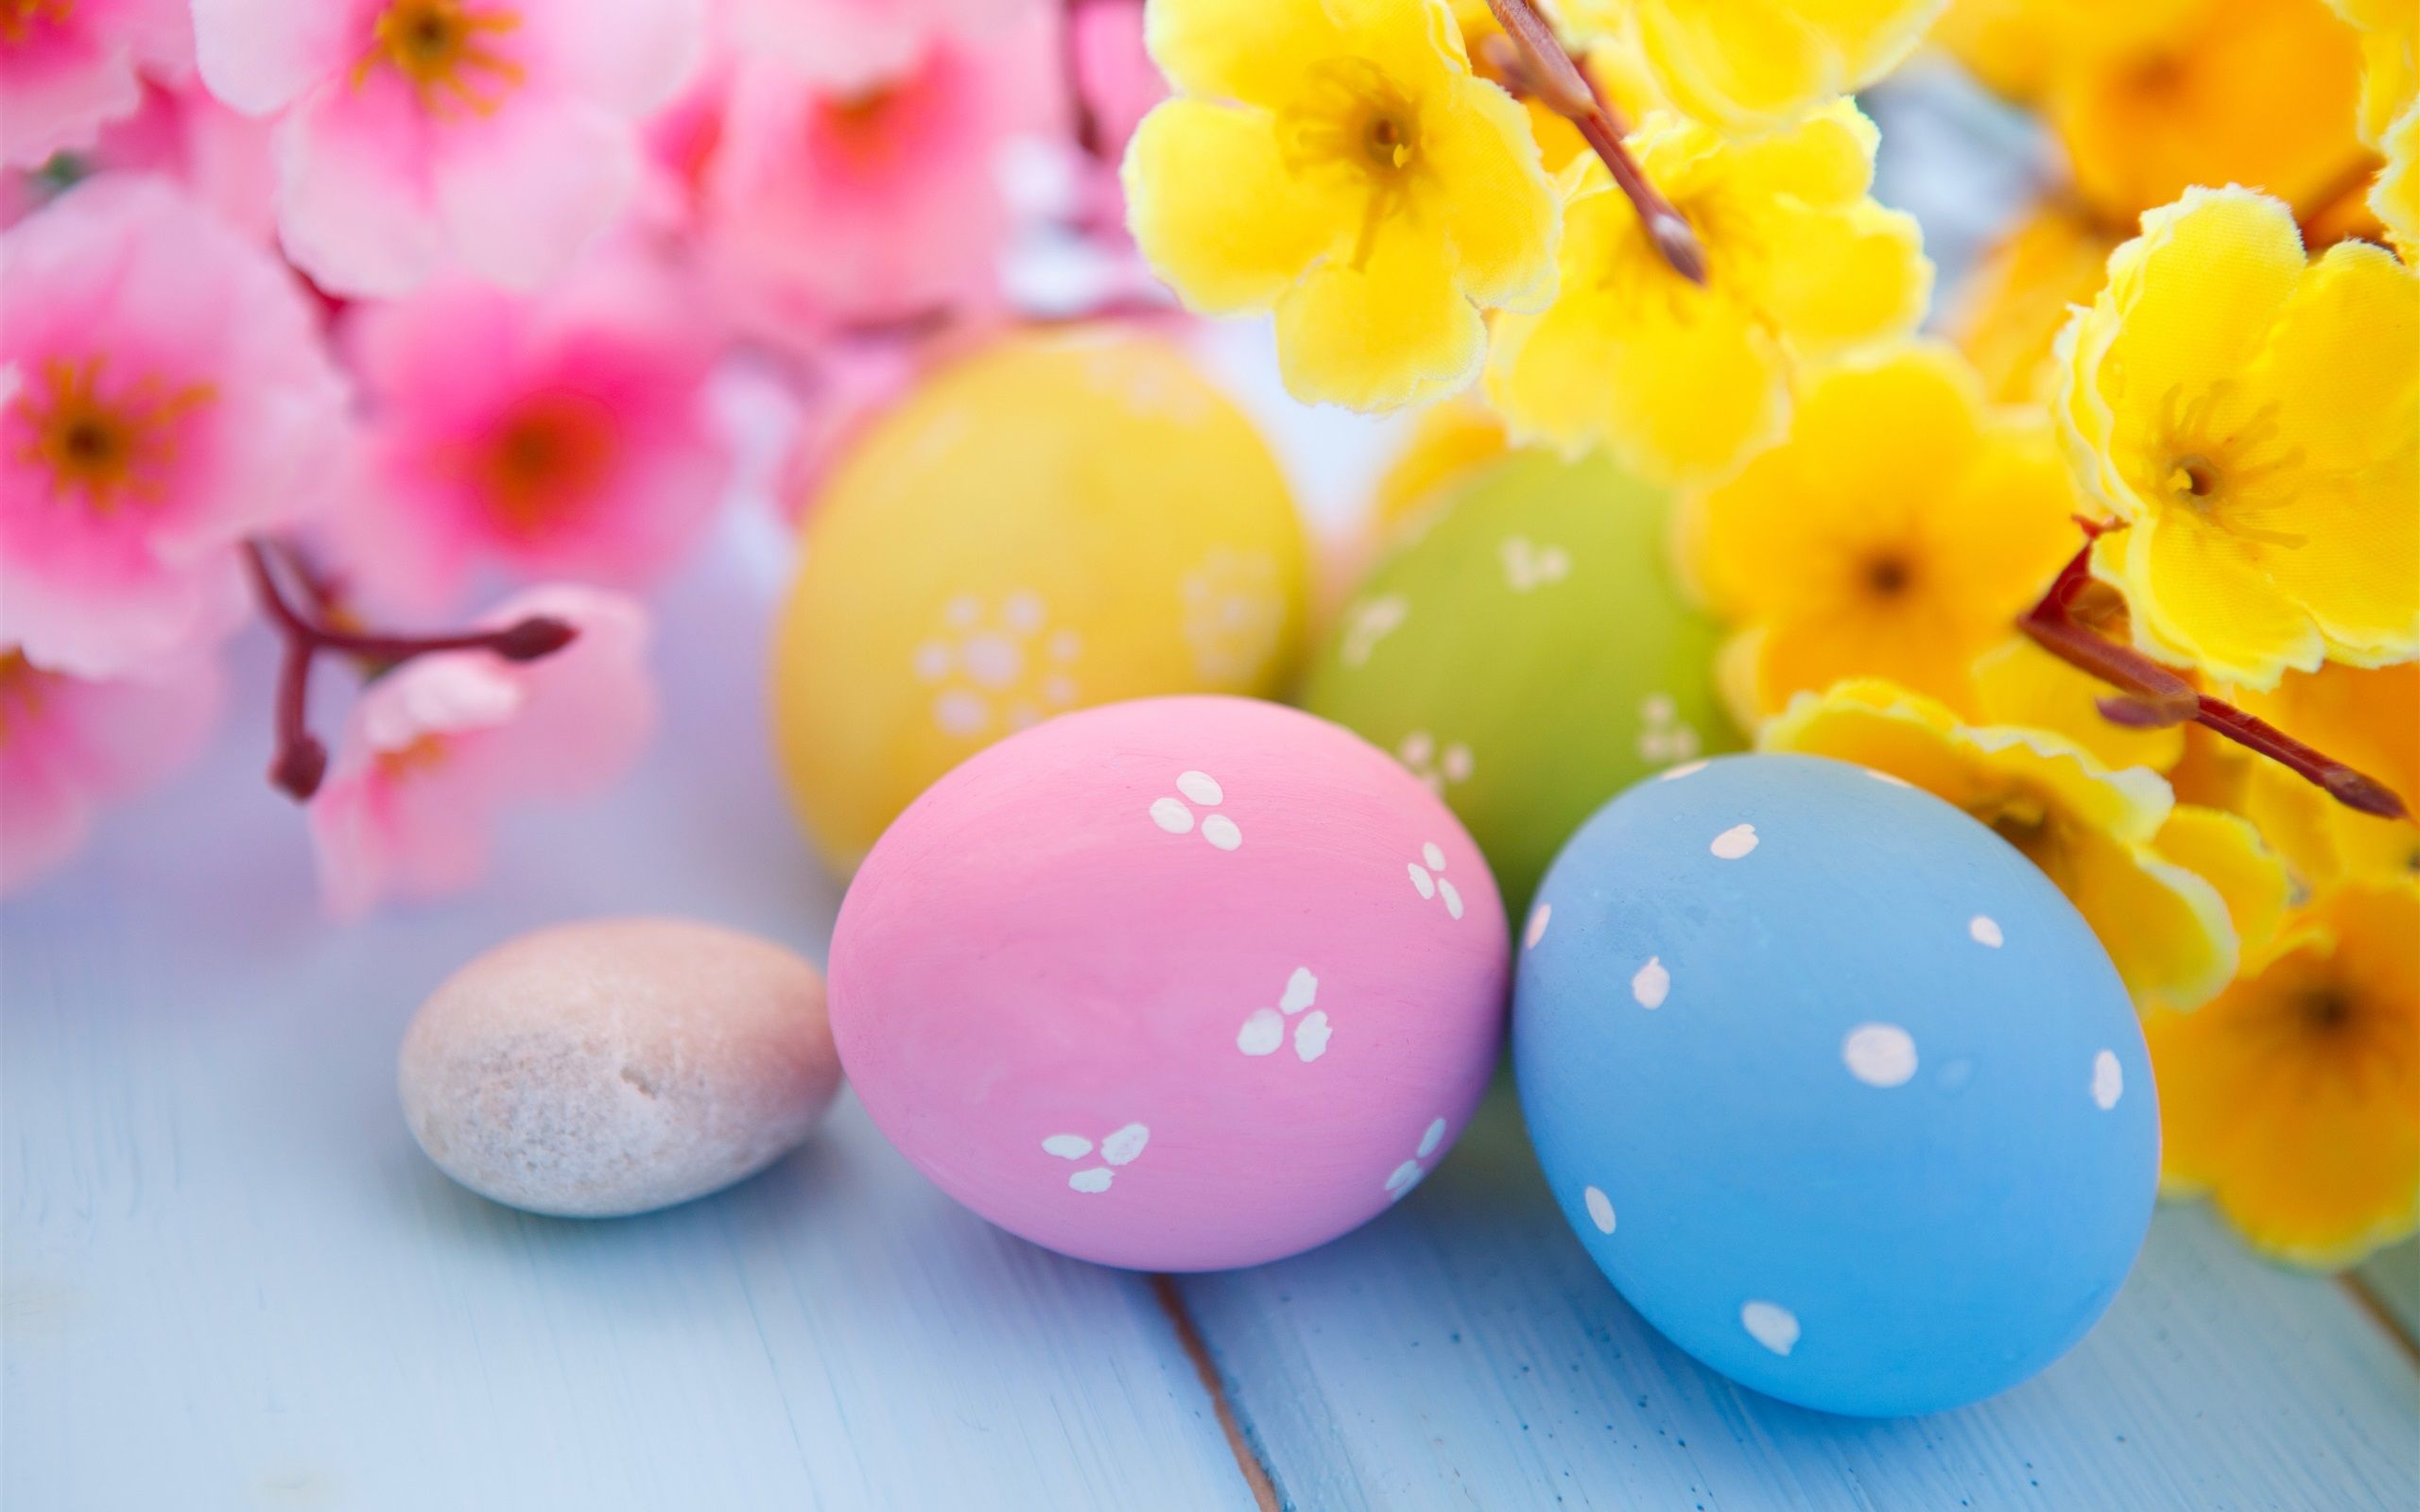 Easter Eggs and Spring Blossoms, HD Celebrations, 4k Wallpaper, Image, Background, Photo and Picture